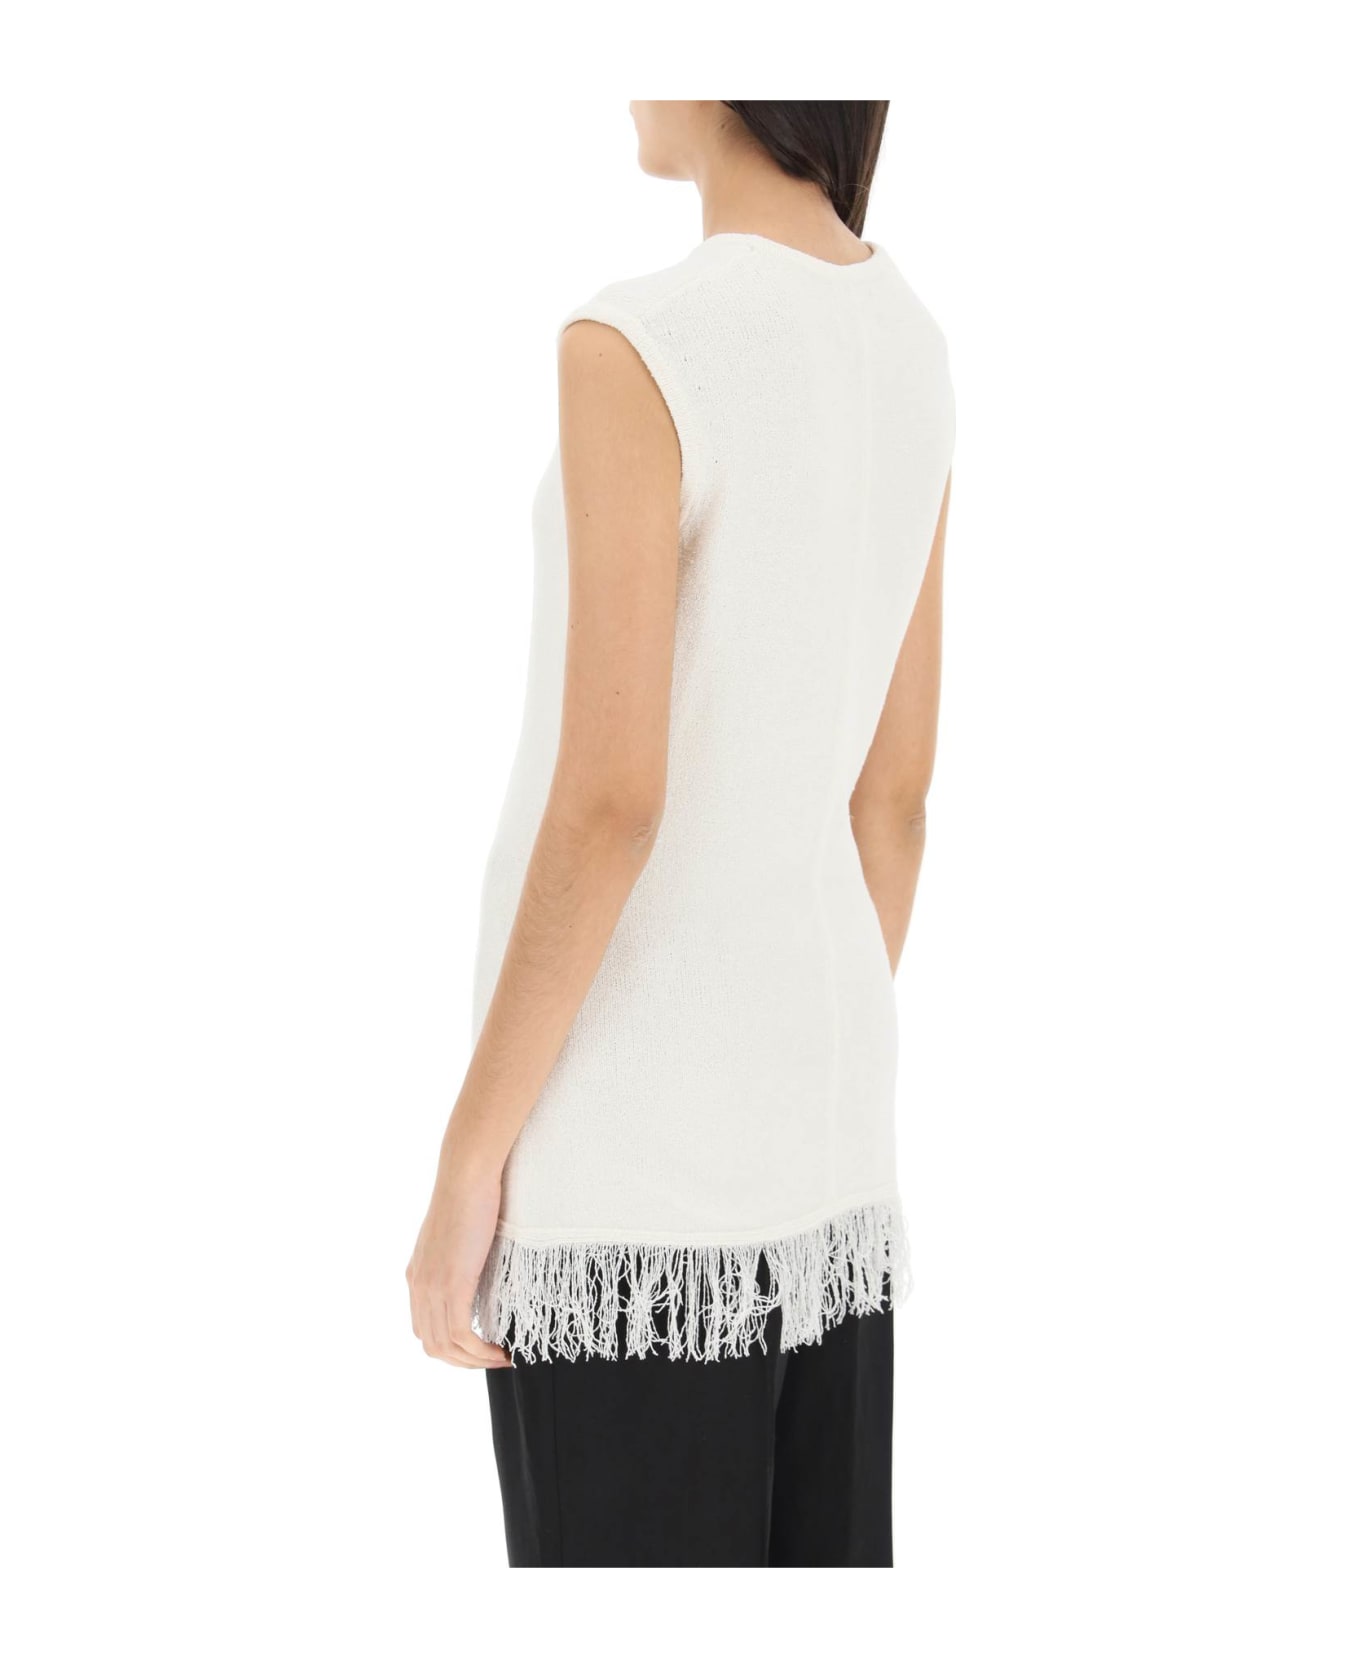 Loulou Studio Fringed Bouclé Knit Top - IVORY (White)